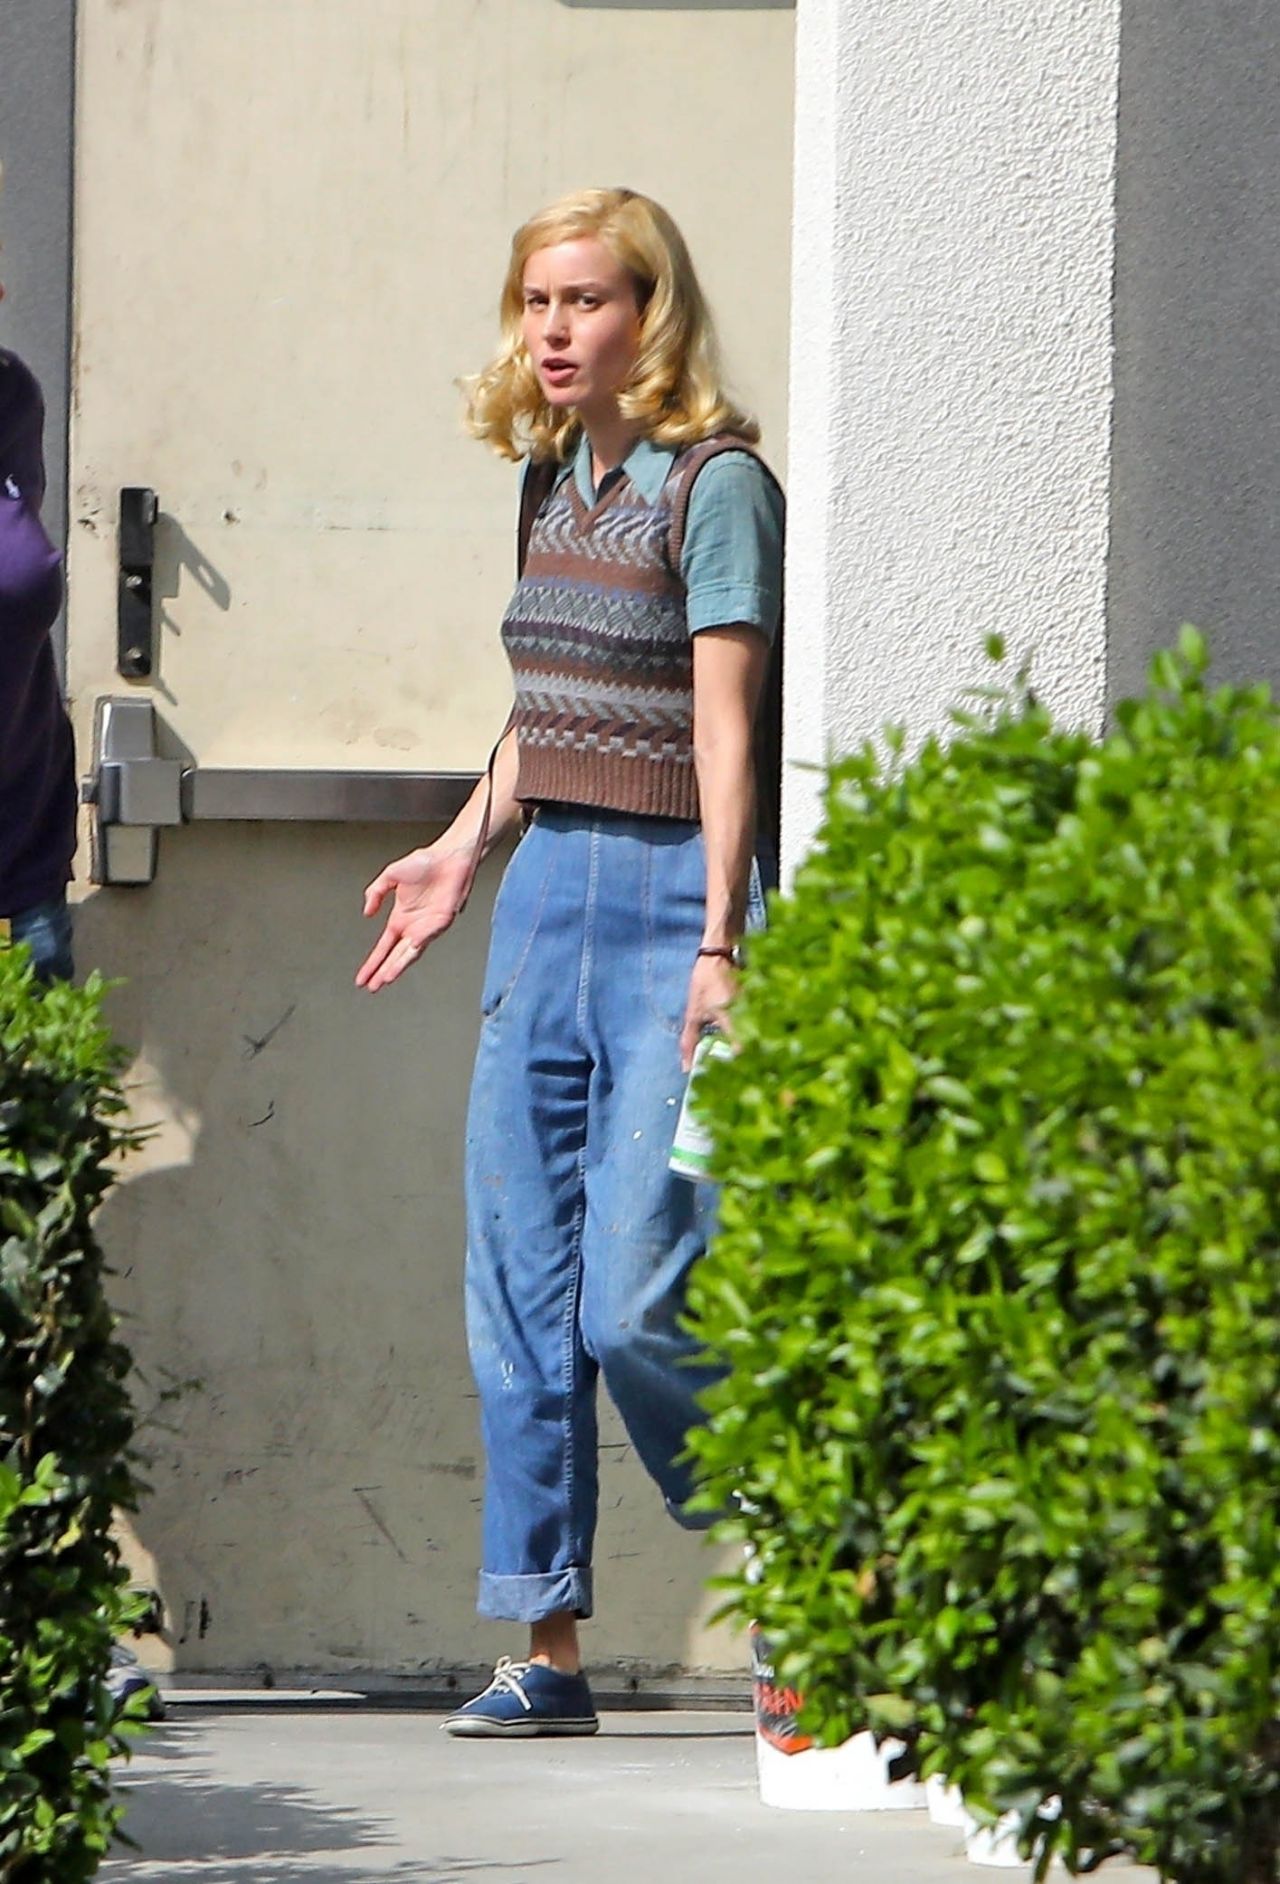 Brie Larson cute on set in nerdy sweater and jeans